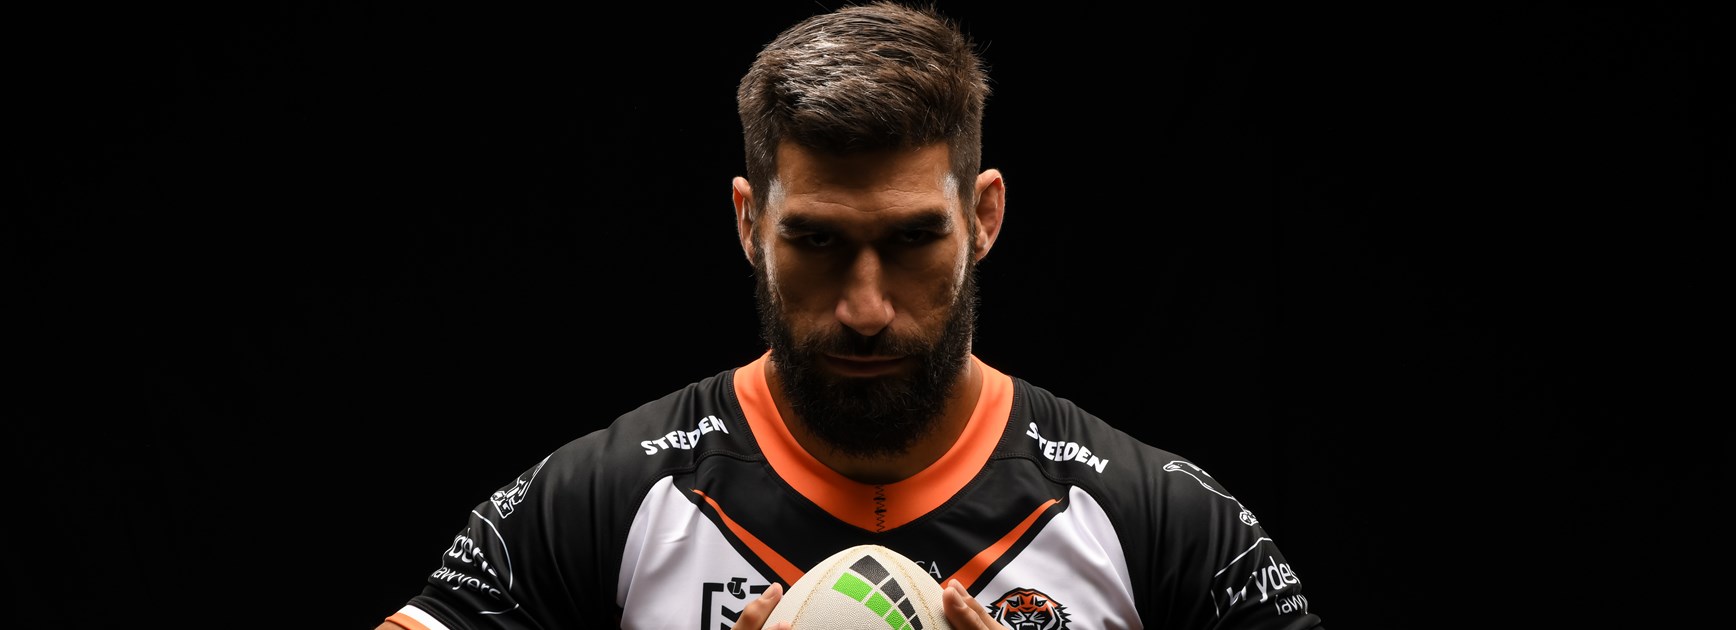 Home, James: Family man Tamou’s emotional journey to 300